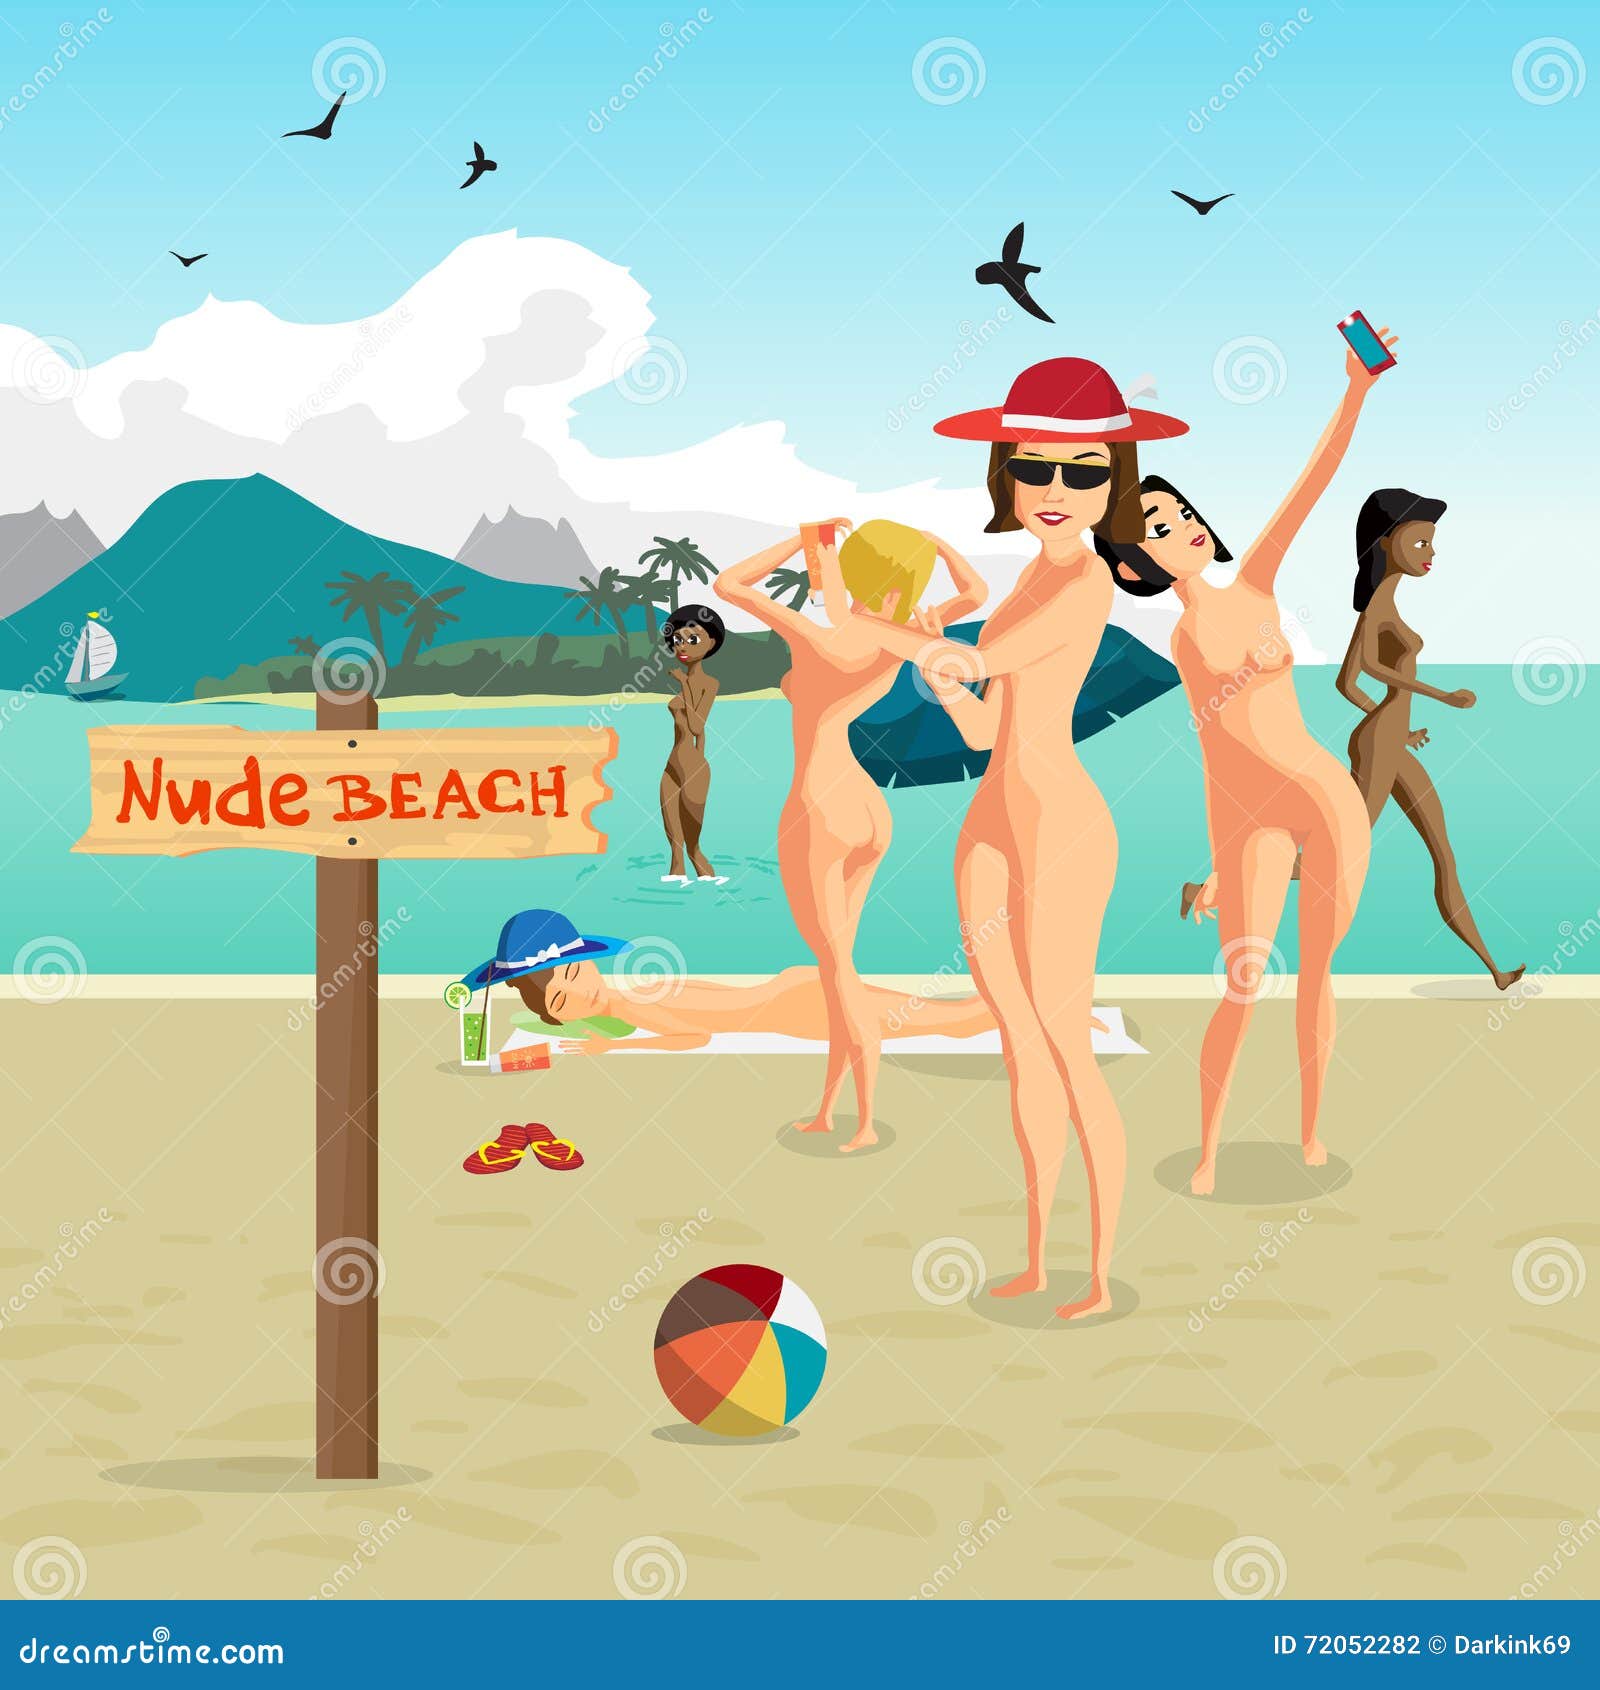 dale woodson recommends Nude Woman Beach